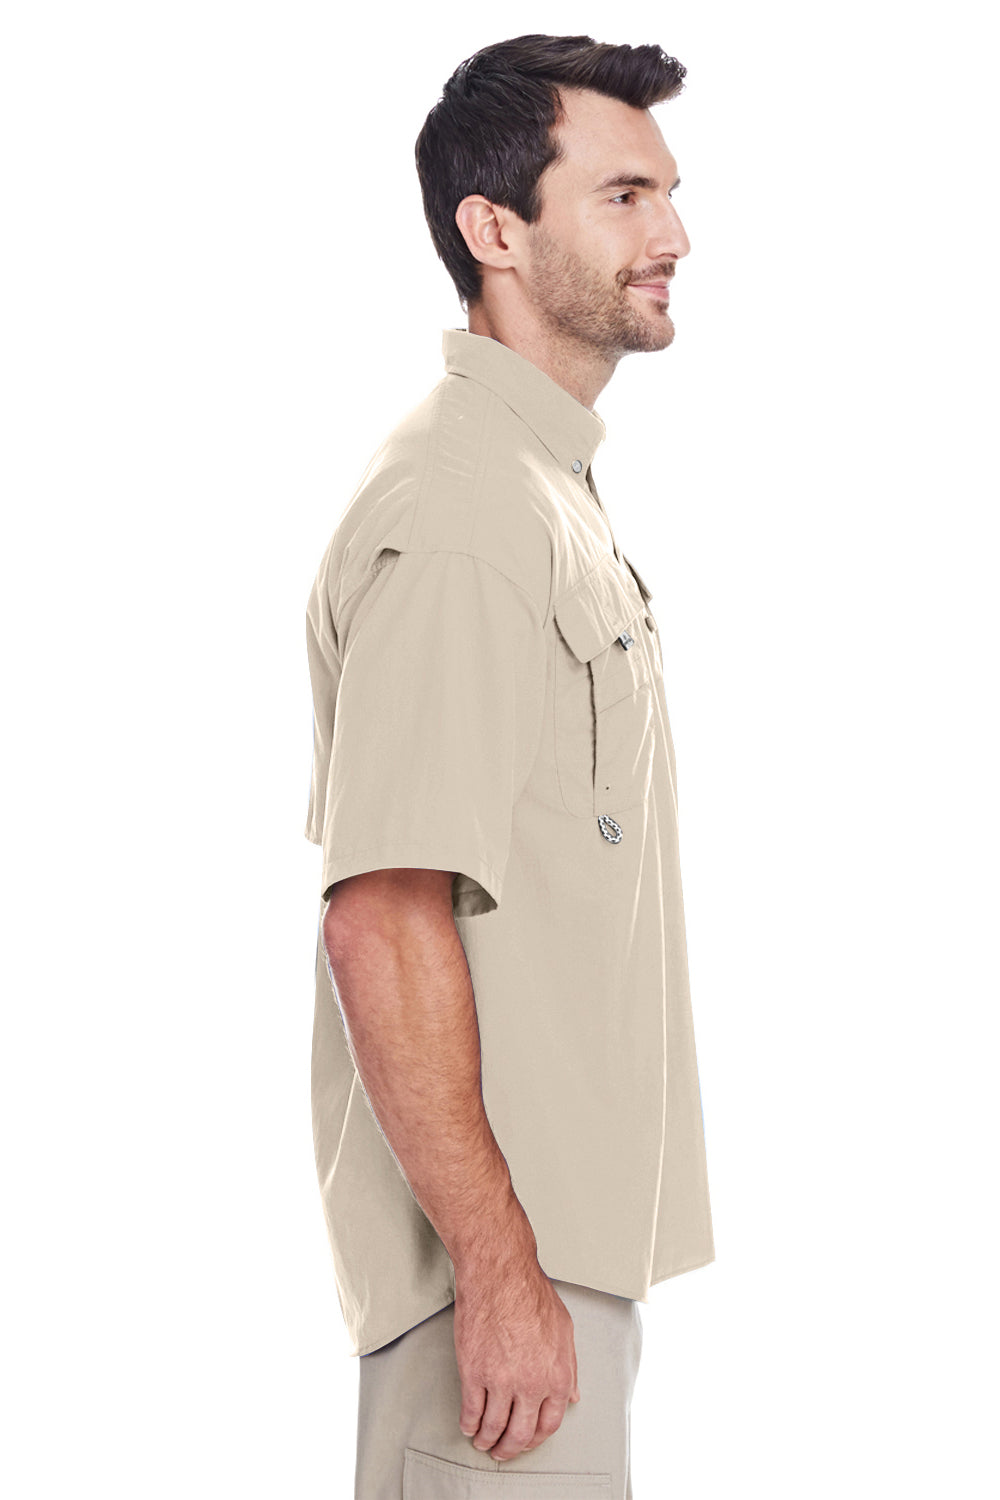 Columbia 7047 Mens Bahama II Moisture Wicking Short Sleeve Button Down Shirt w/ Double Pockets Fossil Brown Side